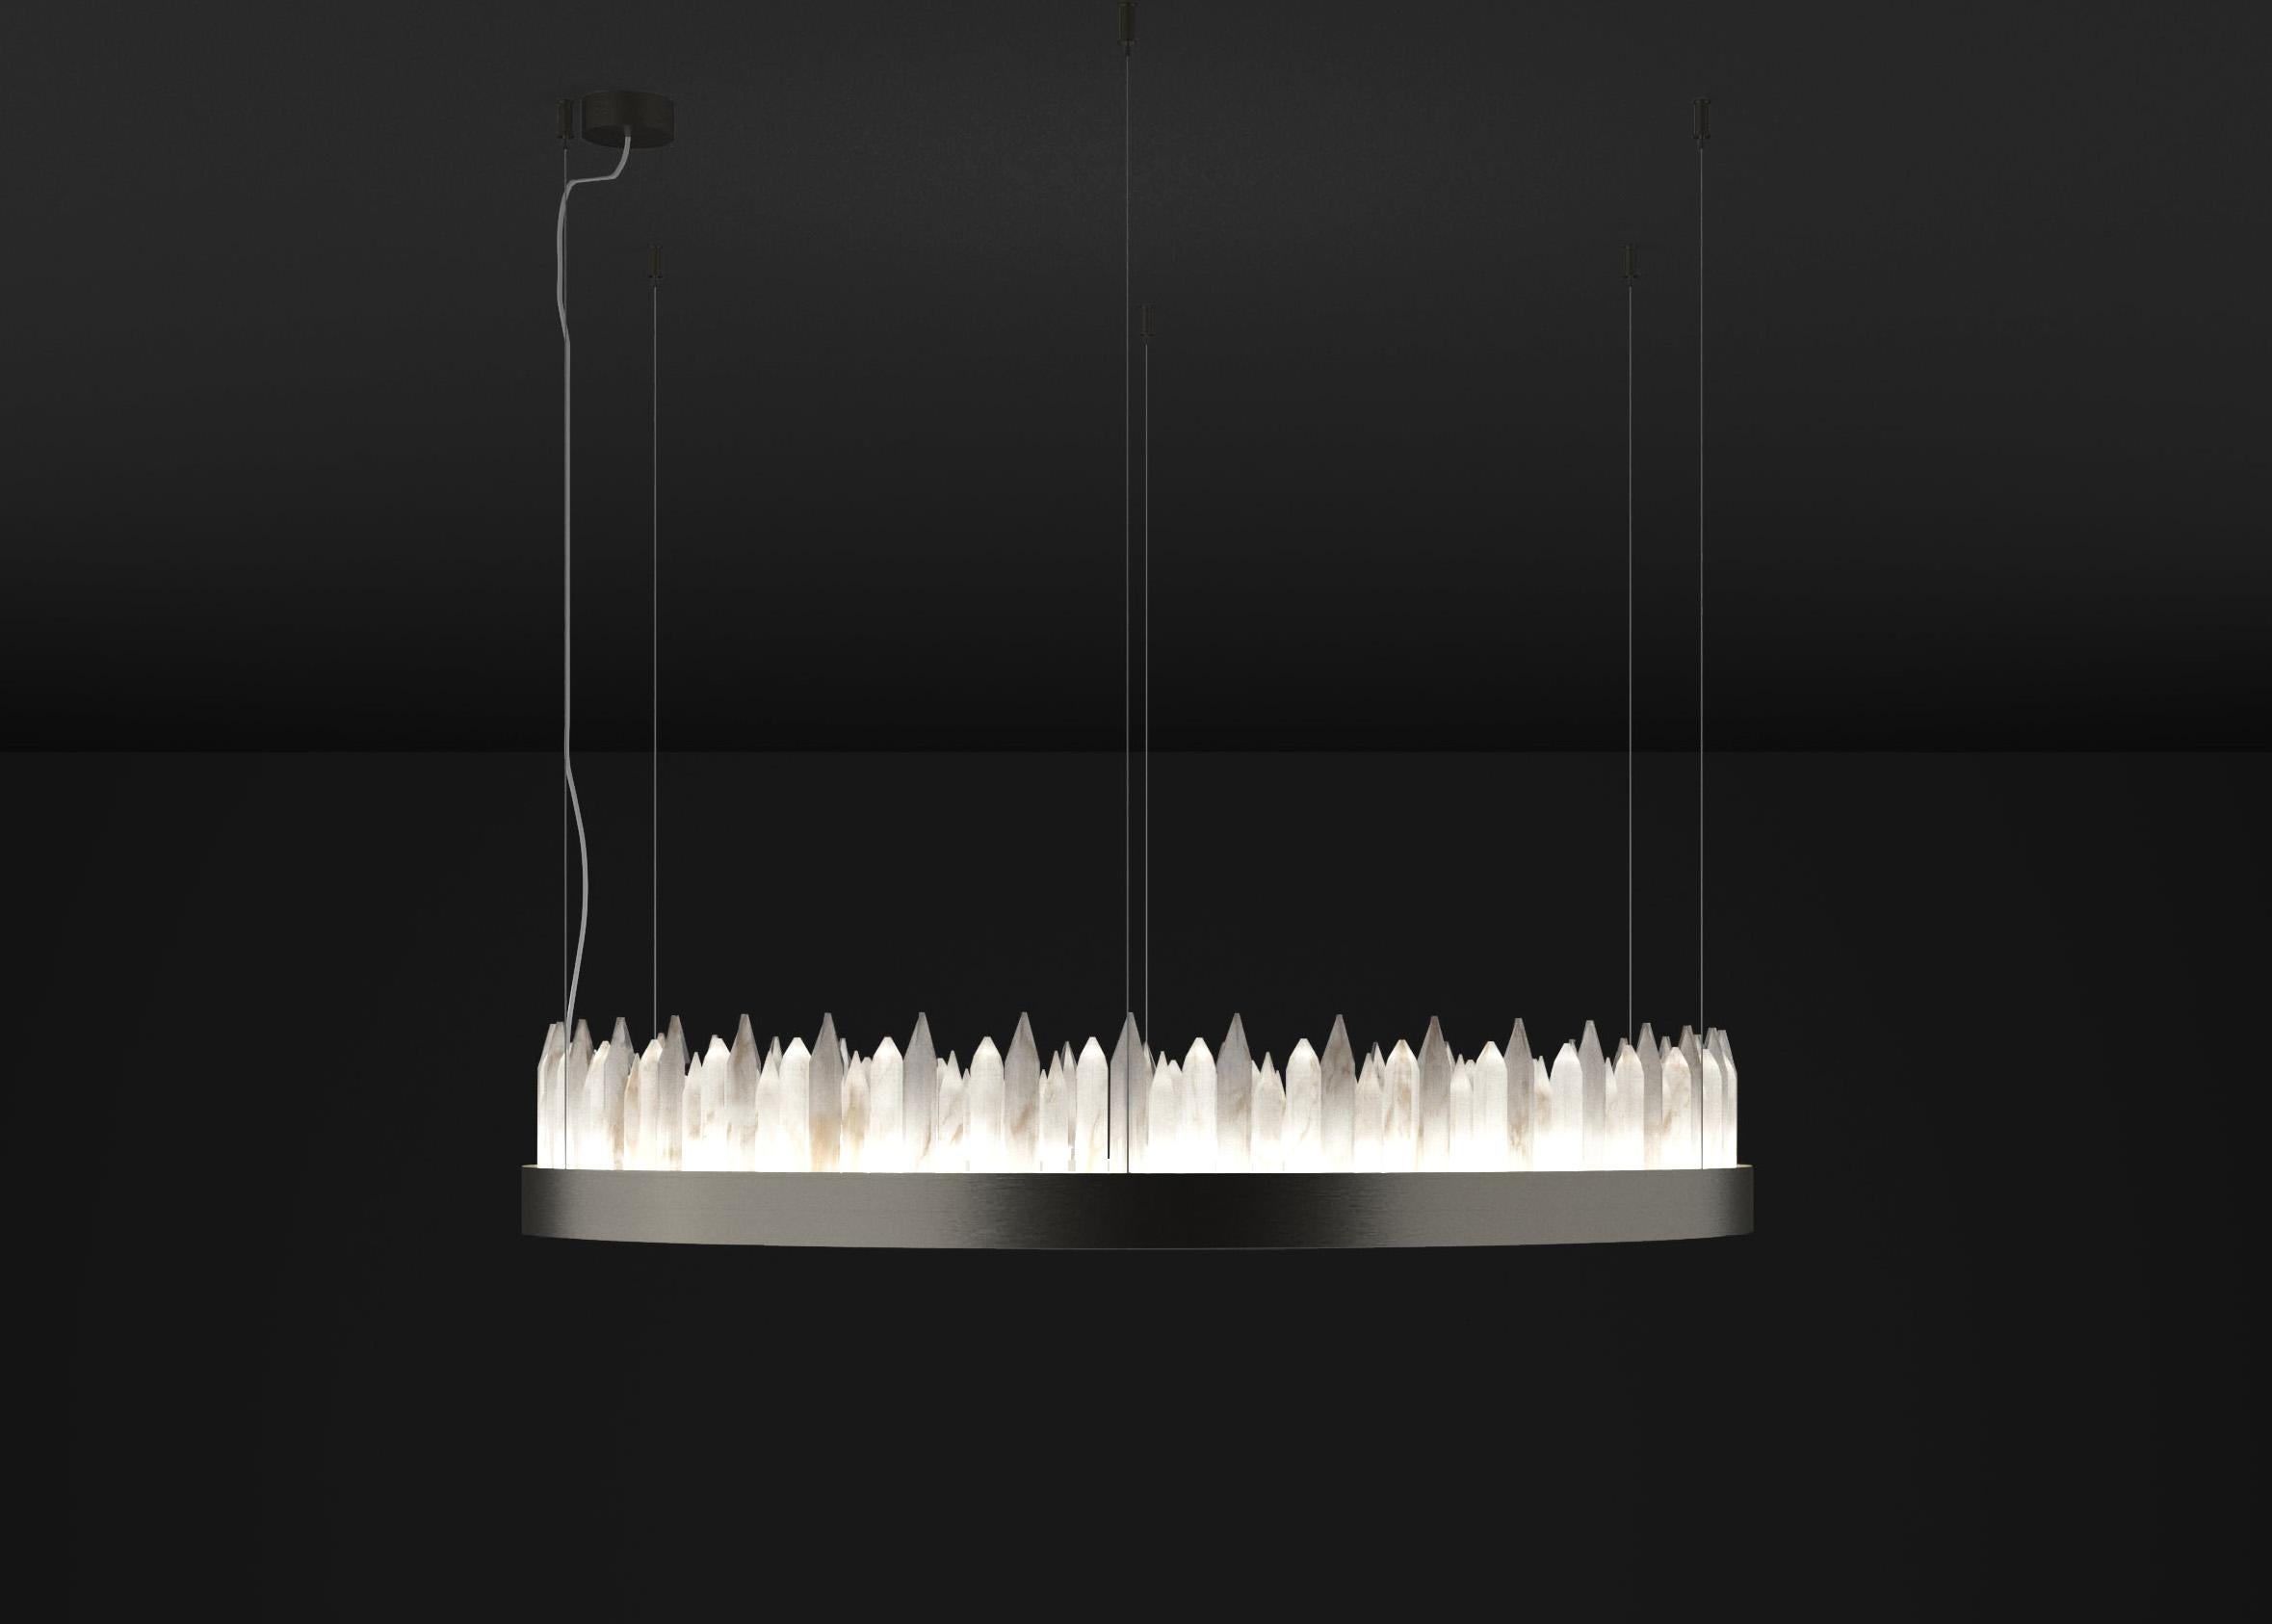 Urano Brushed Black 60 Pendant Light 3 by Alabastro Italiano
Dimensions: Ø 60 x H 20 cm.
Materials: Glass and brushed black metal.

2 Strip LED, 81 Watt, 8121 Lumen, 24 V, 3000 K, Wiring CE.

Available in different sizes: Ø 60, Ø 80, Ø 100 and Ø 120